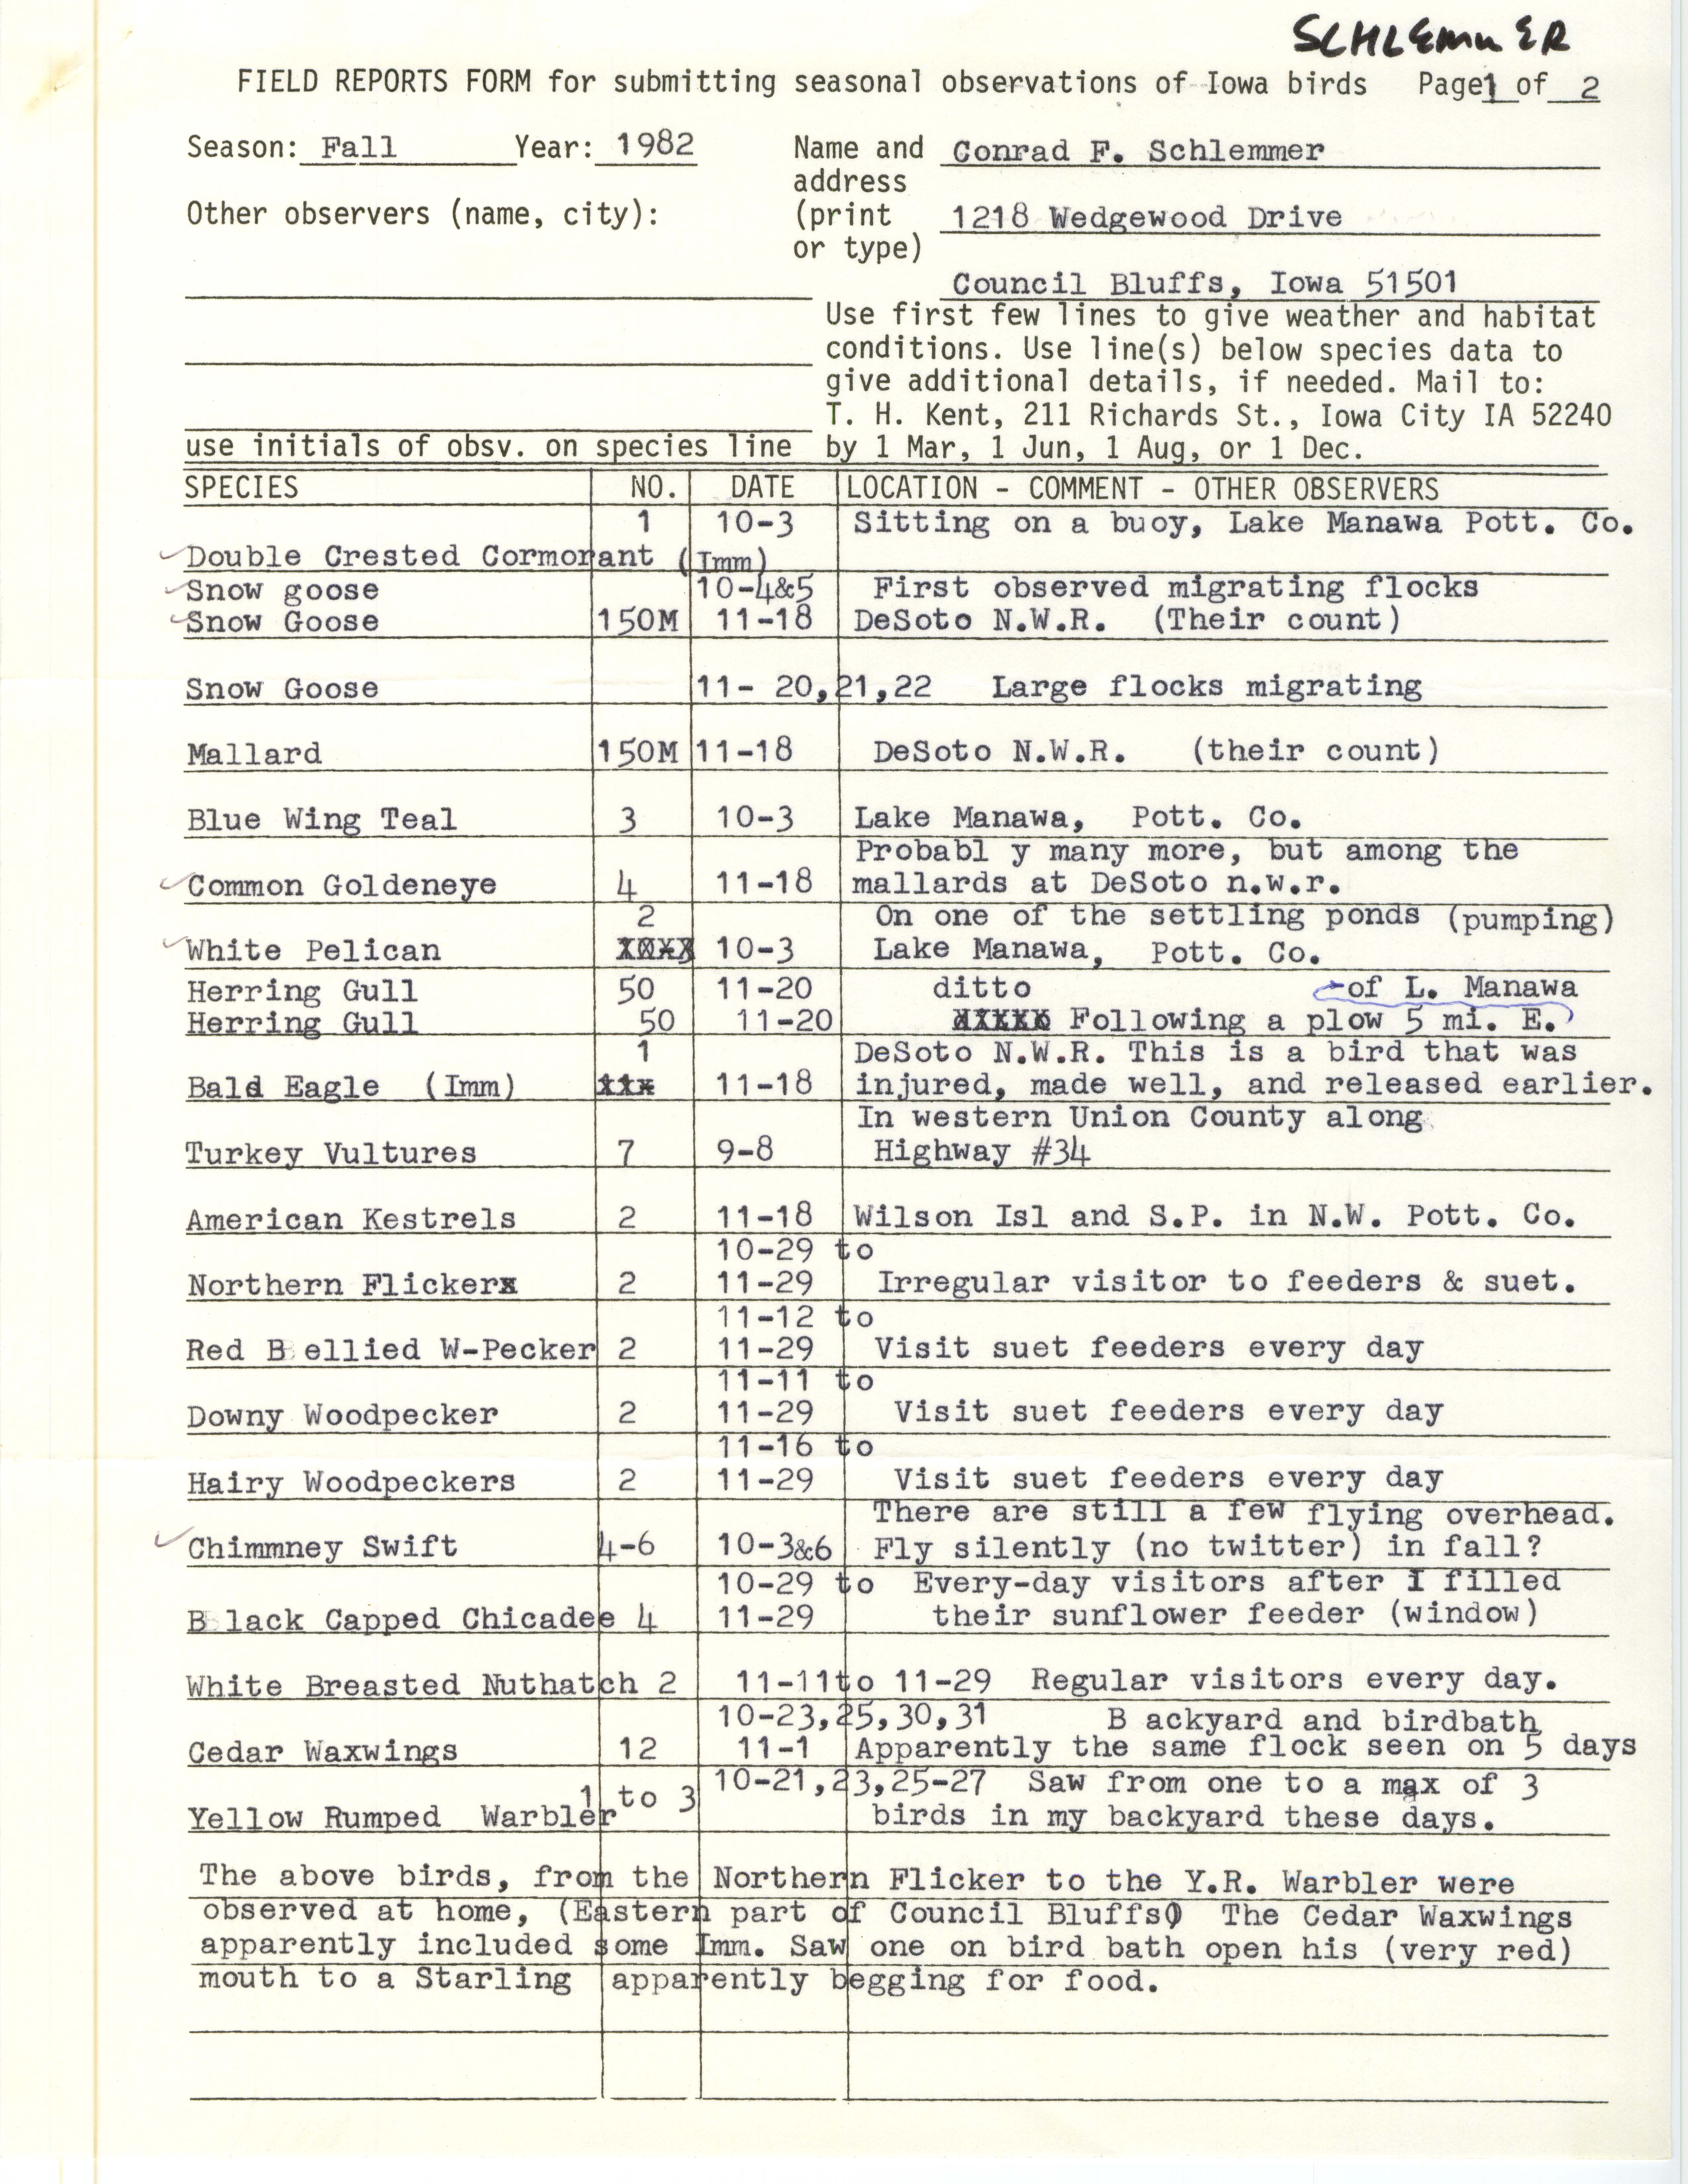 Field notes contributed by Conrad F. Schlemmer, fall 1982